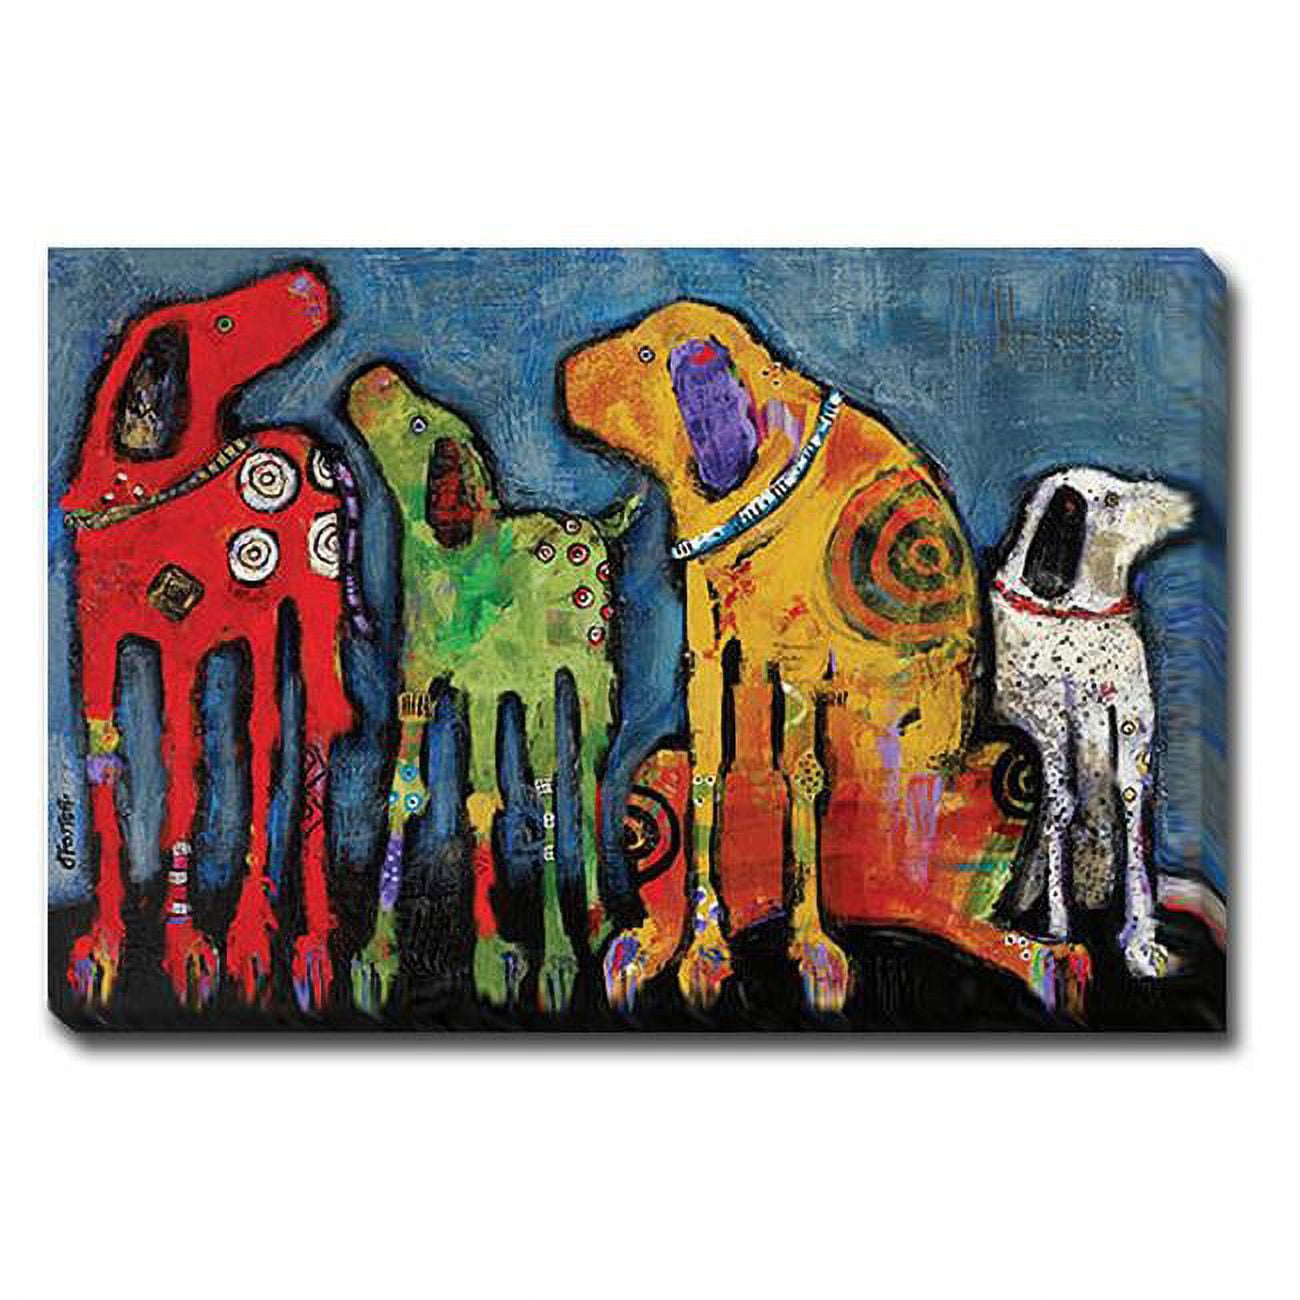 12184746eg Best Friends By Jenny Foster Premium Gallery-wrapped Canvas Giclee Art - 12 X 18 In.